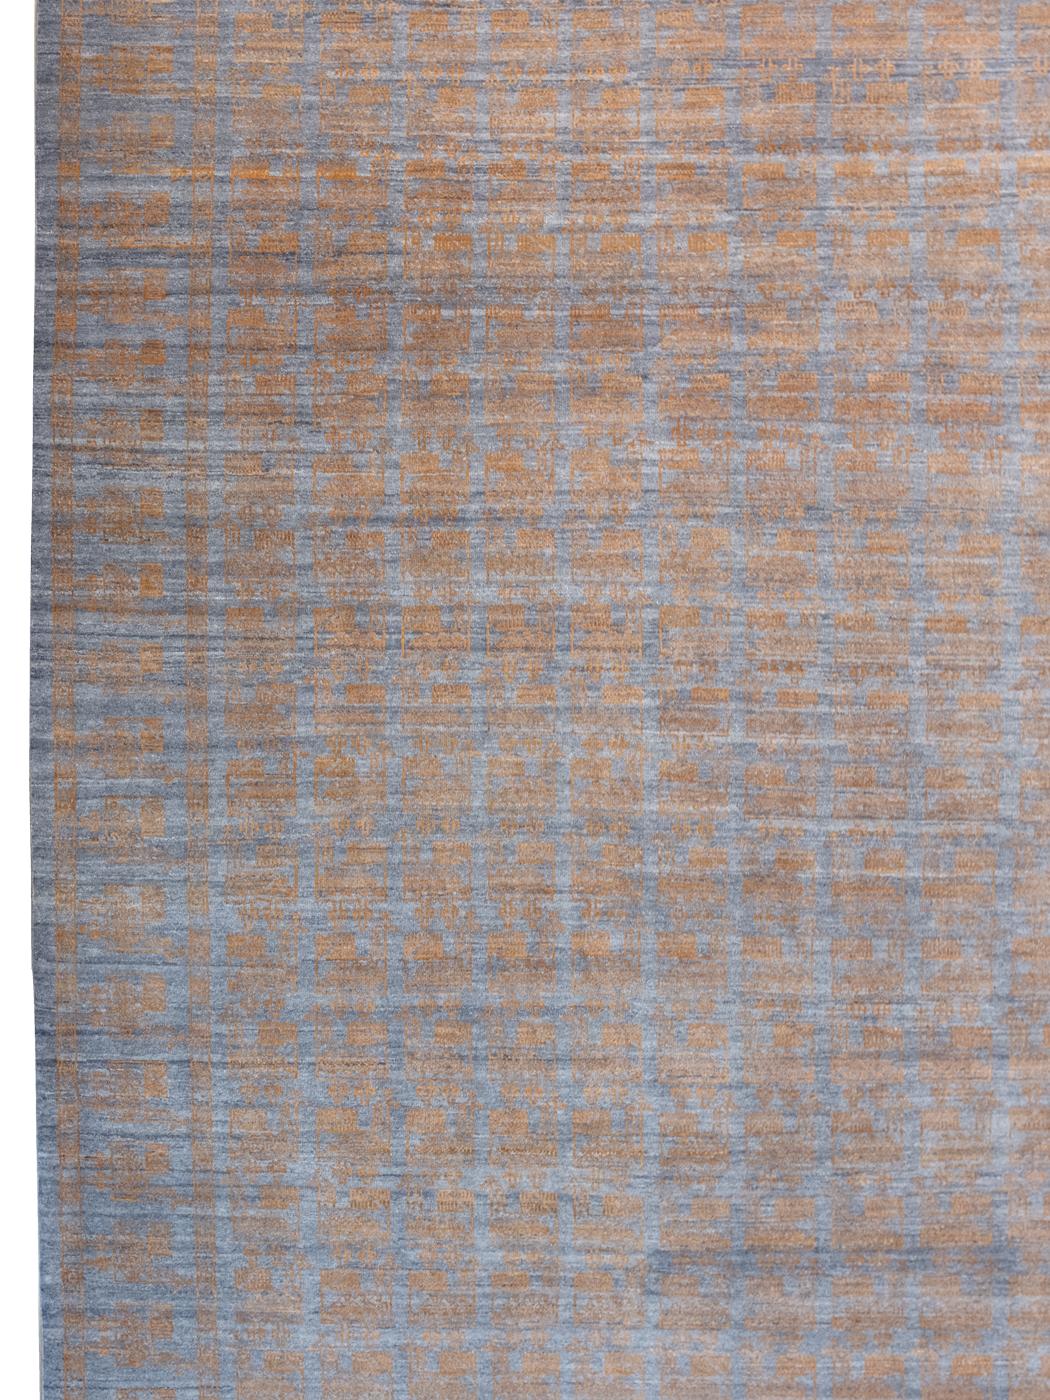 Persian Orley Shabahang, Orange and Gray Contemporary Peacock Carpet, Wool, 9' x 12' For Sale